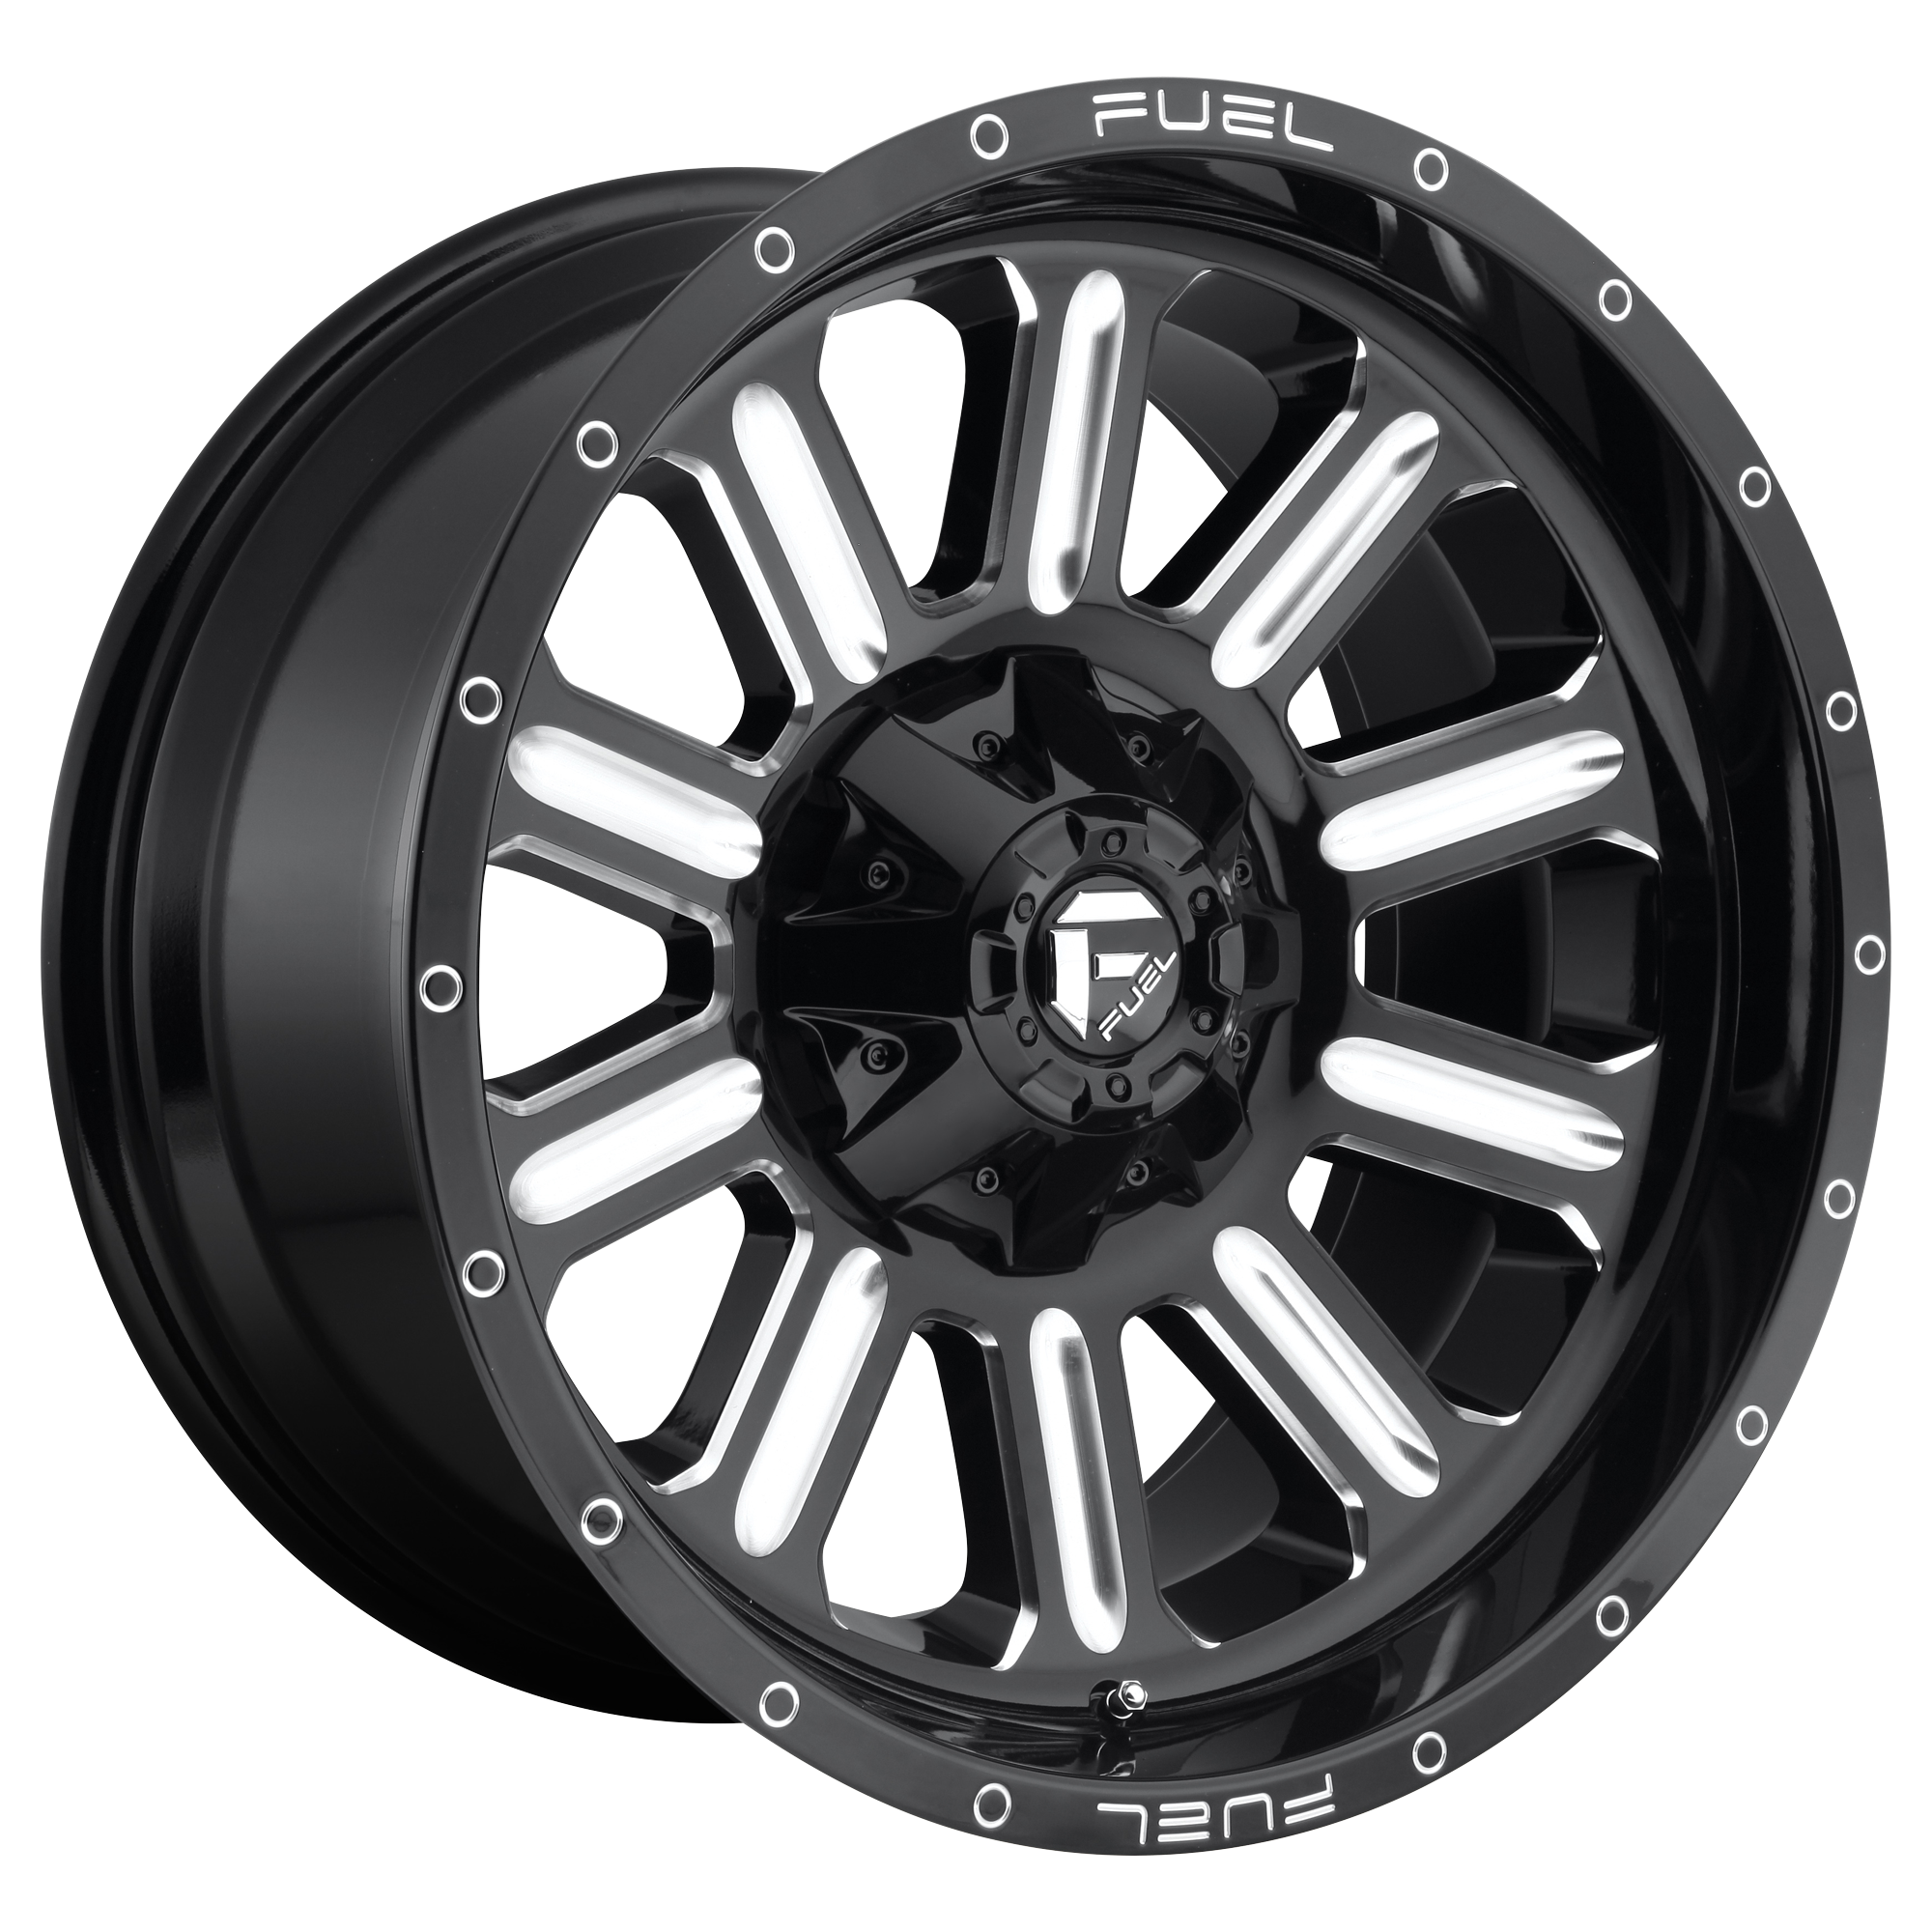 HARDLINE 17x9 5x139.70/5x150.00 GLOSS BLACK MILLED (1 mm) - Tires and Engine Performance